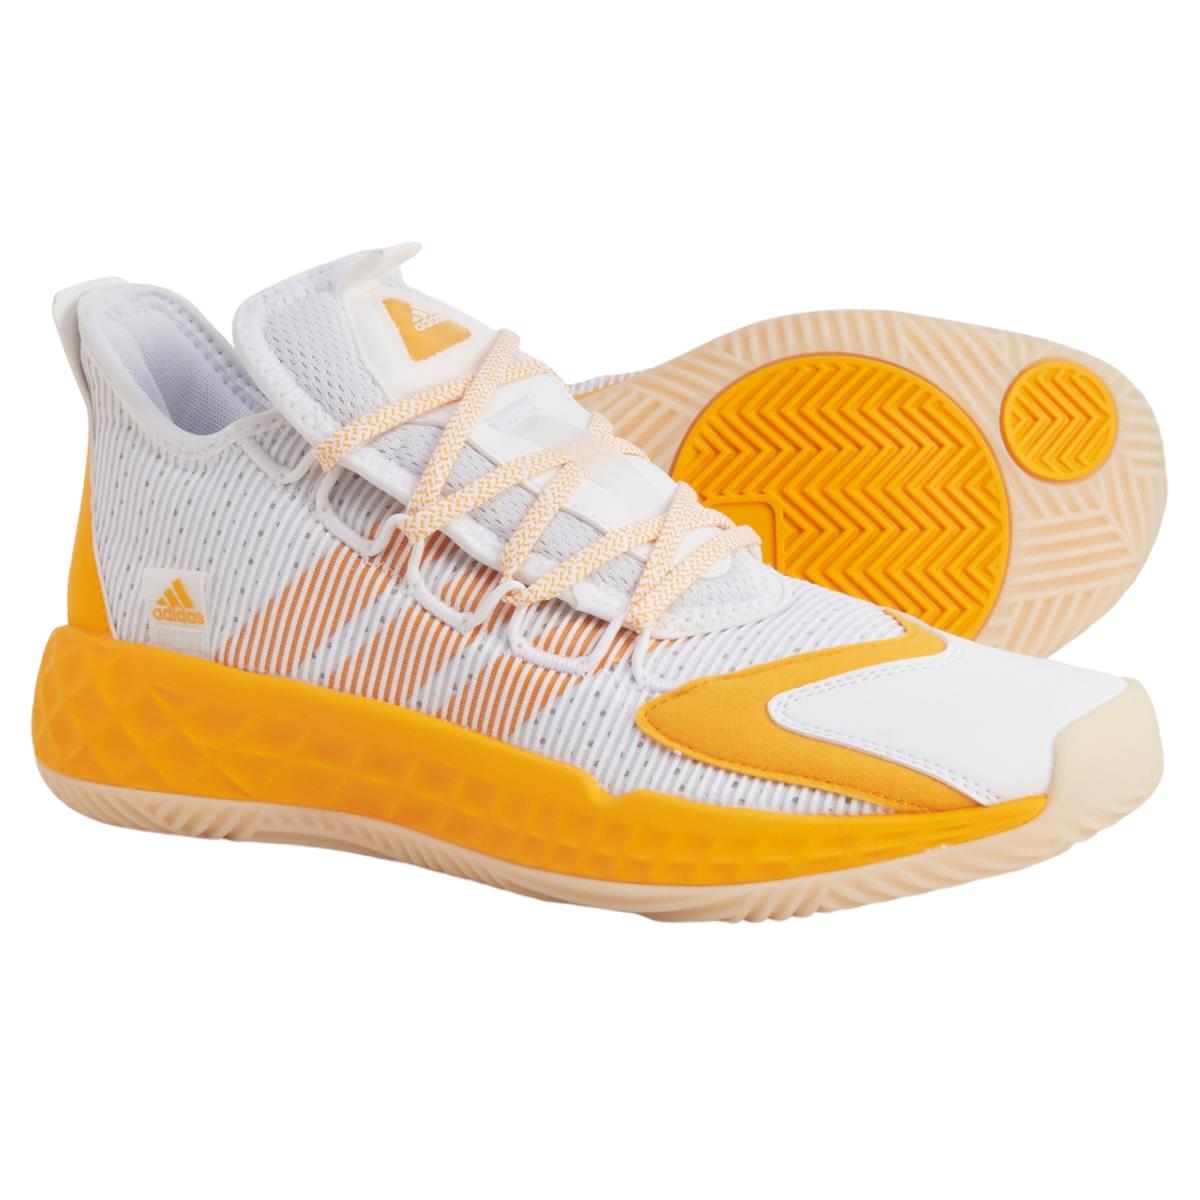 Adidas Pro Boost Low Basketball Shoes Color White Yellow Men`s Size US 17